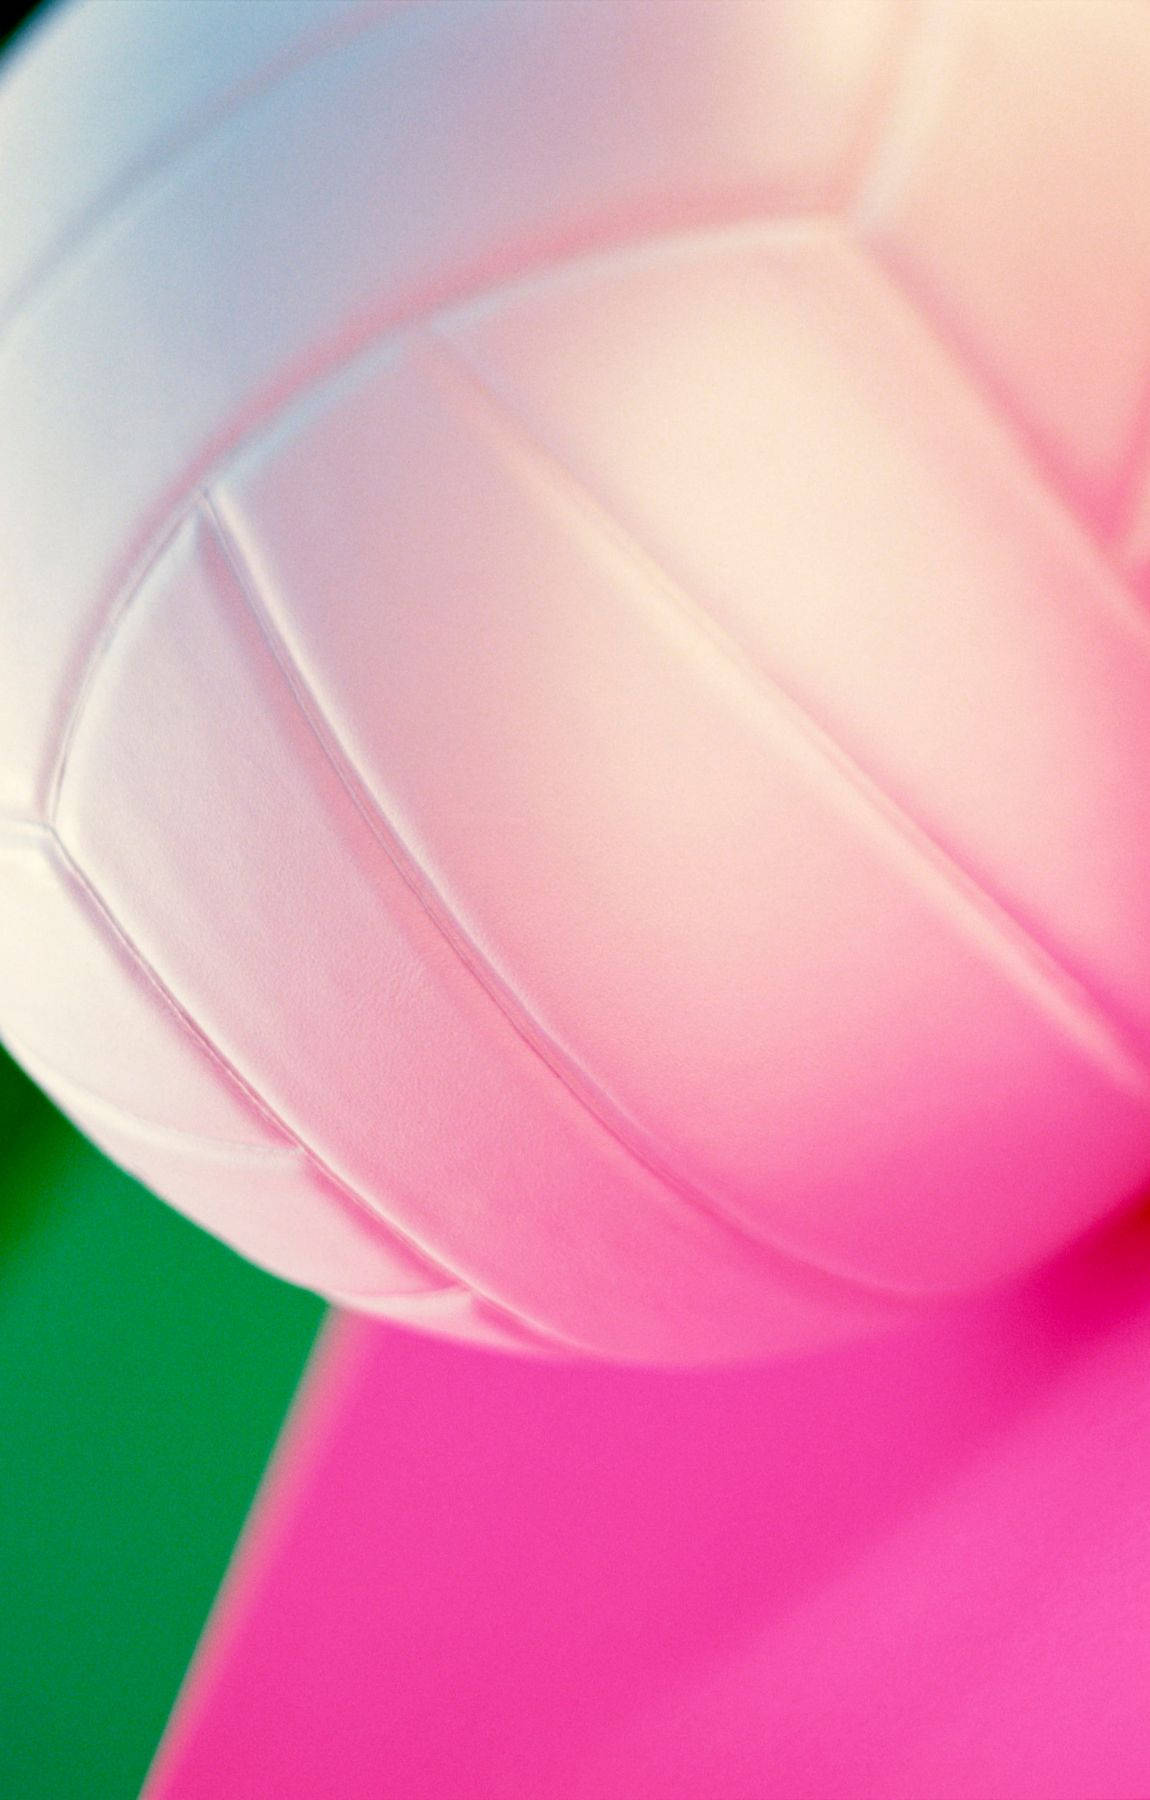 A view of a volleyball seen from above. Wallpaper